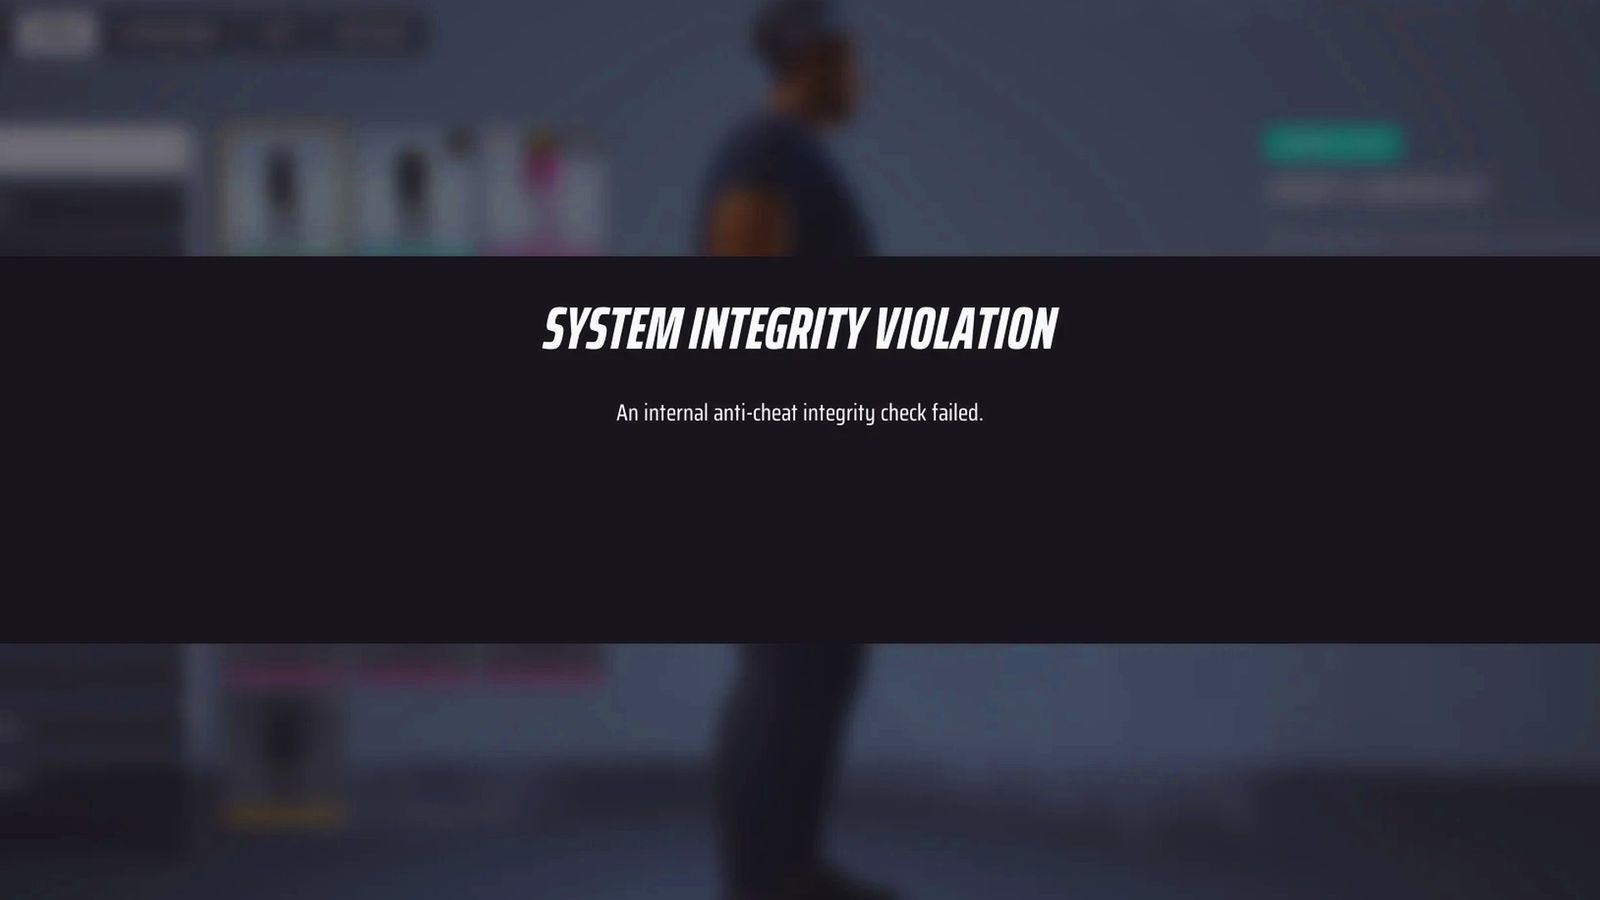 The Finals - "System Integrity Violation: An internal anti-cheat integrity check failed"